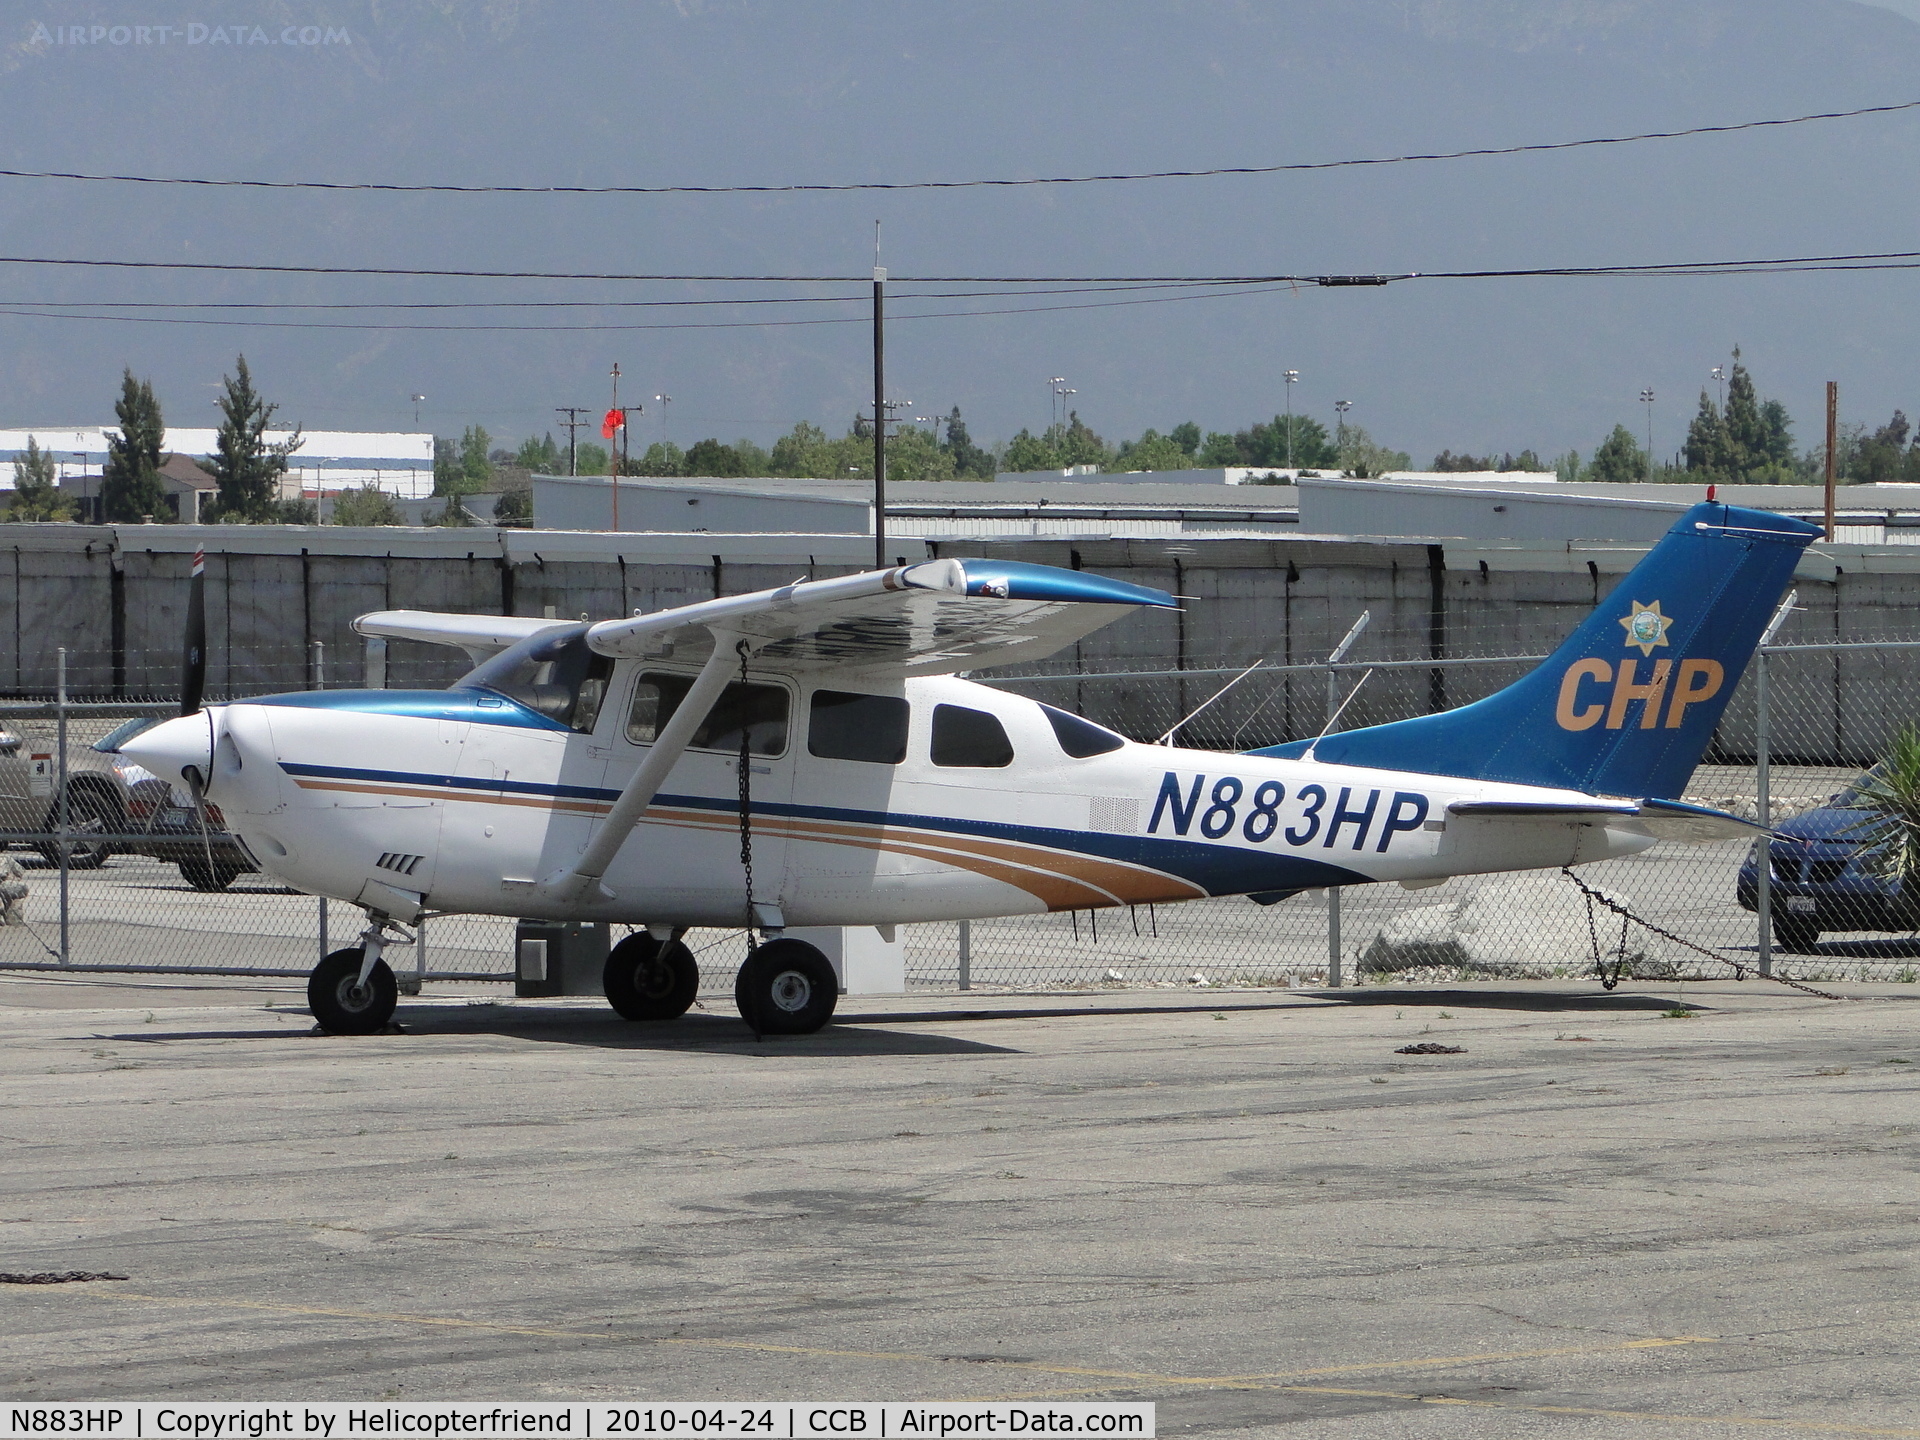 N883HP, 2000 Cessna T206H Turbo Stationair C/N T20608235, Parked at Foothill Aircraft Sales and Service